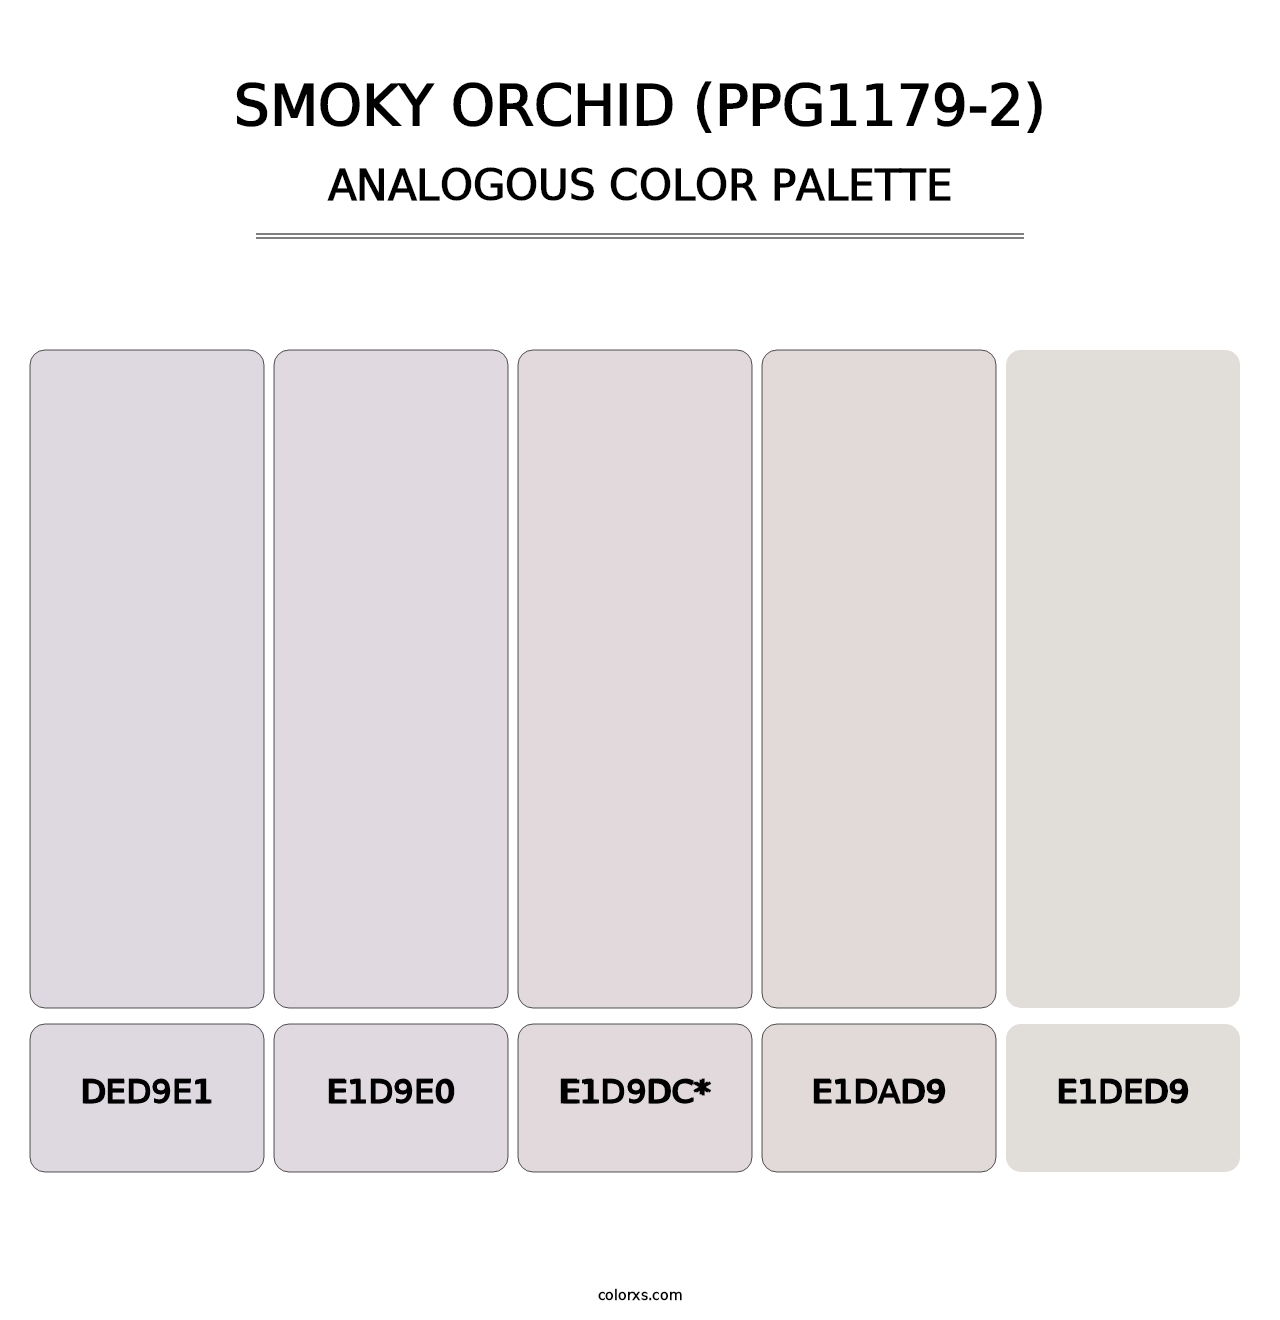 Smoky Orchid (PPG1179-2) - Analogous Color Palette